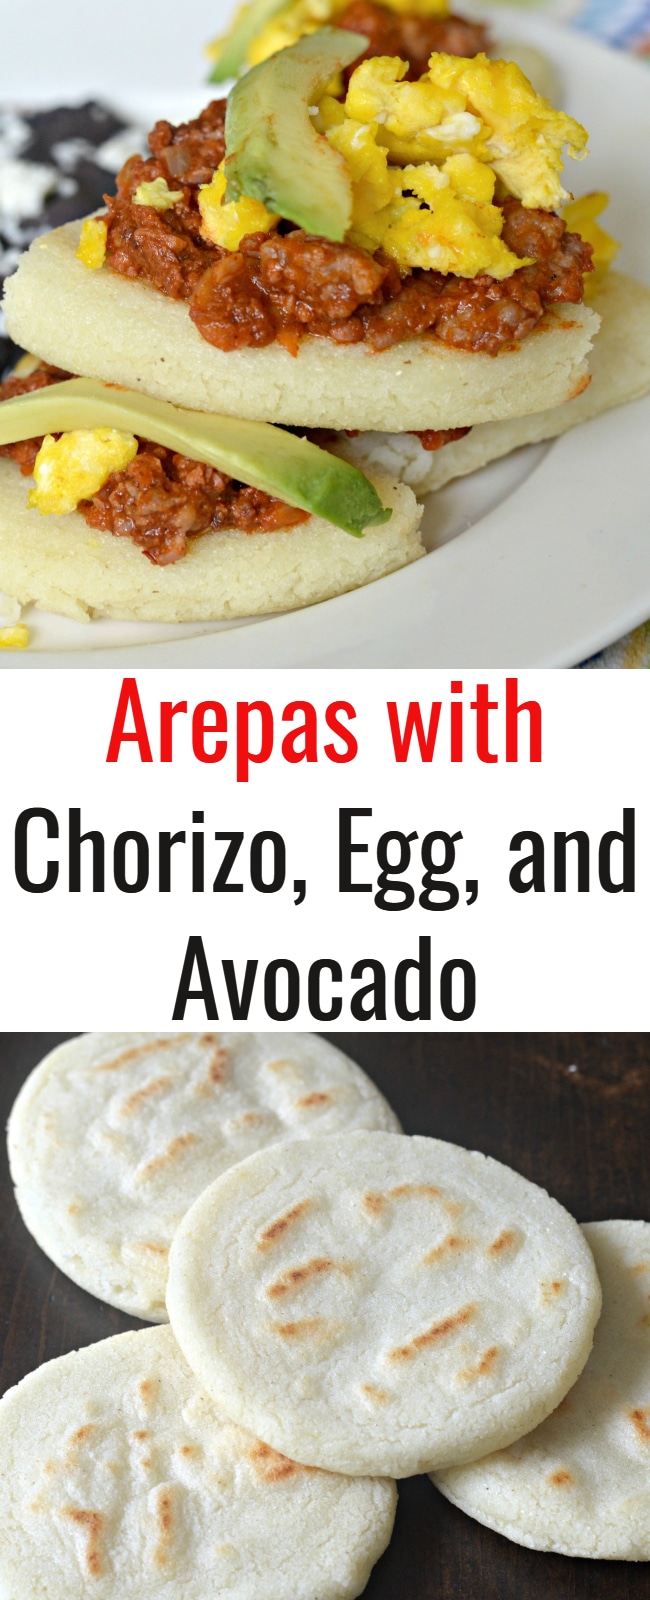 These delicious Arepas with Chorizo, Egg, and Avocado are a great twist on a classic Colombian recipe. Check it out below. 